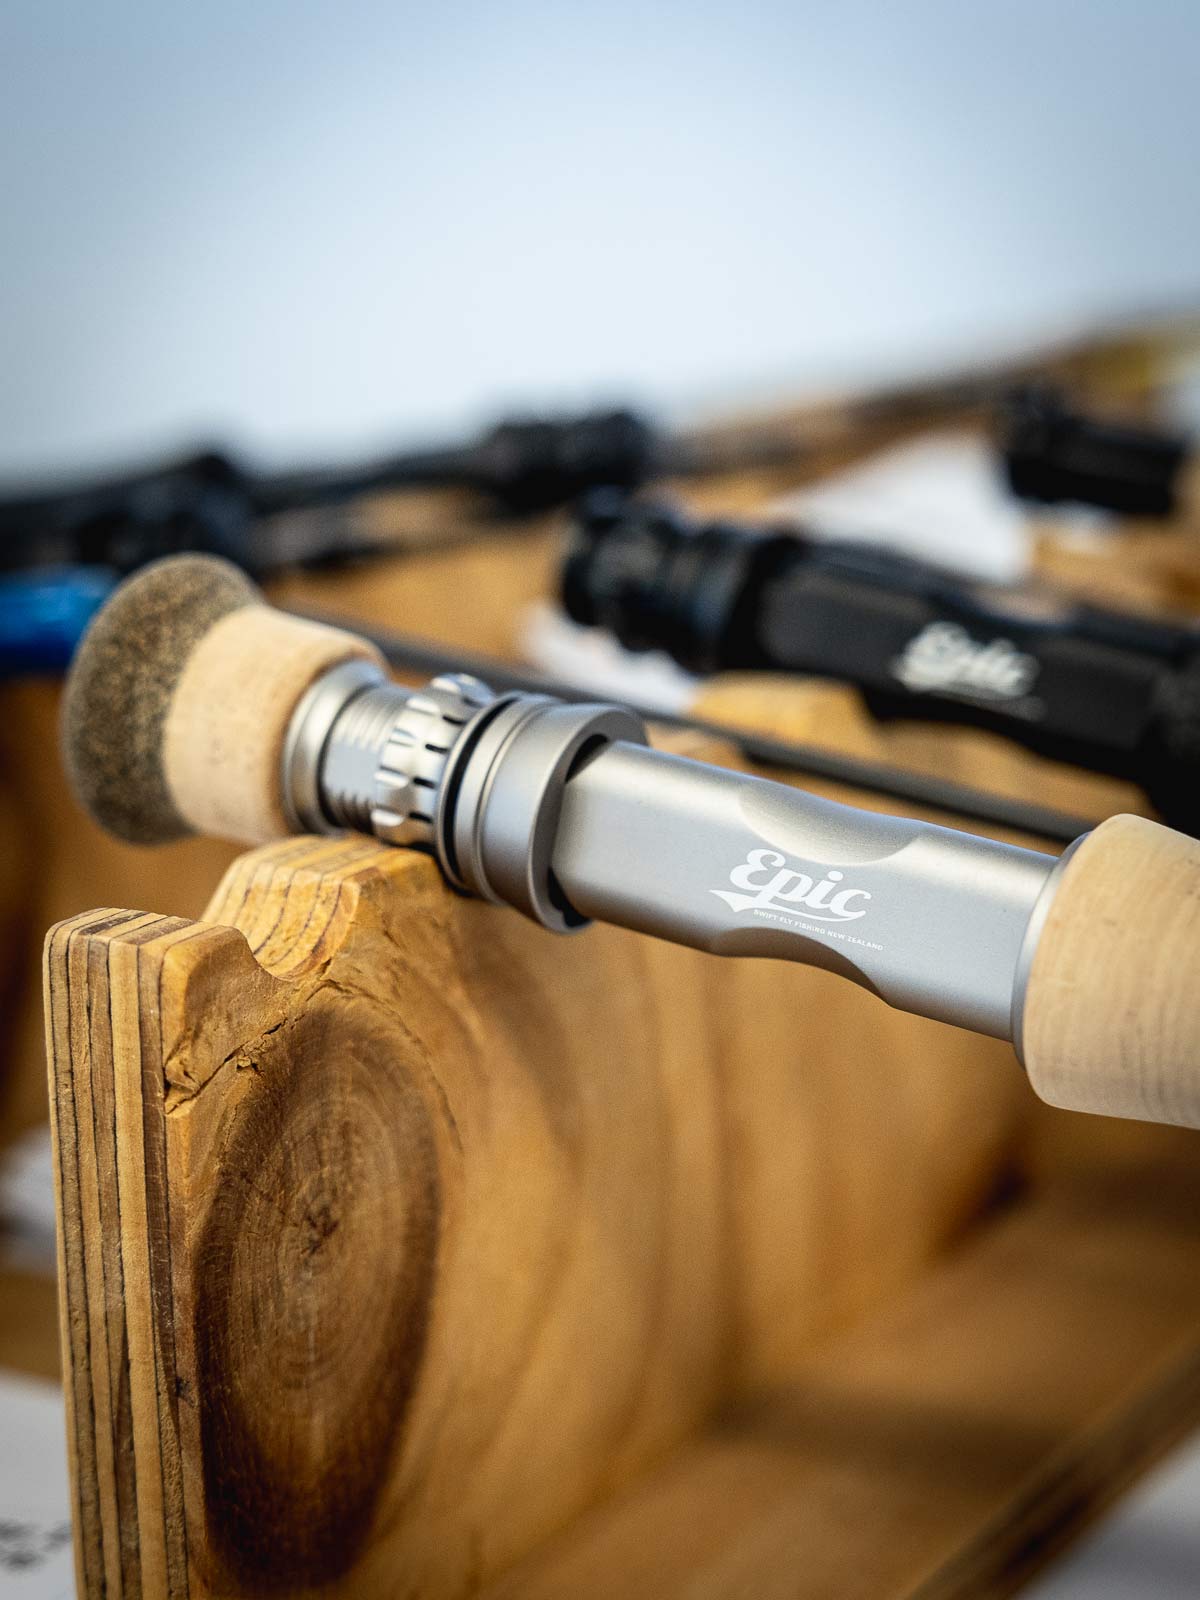 Epic handcrafted fly rods the spirit of craftsmanship